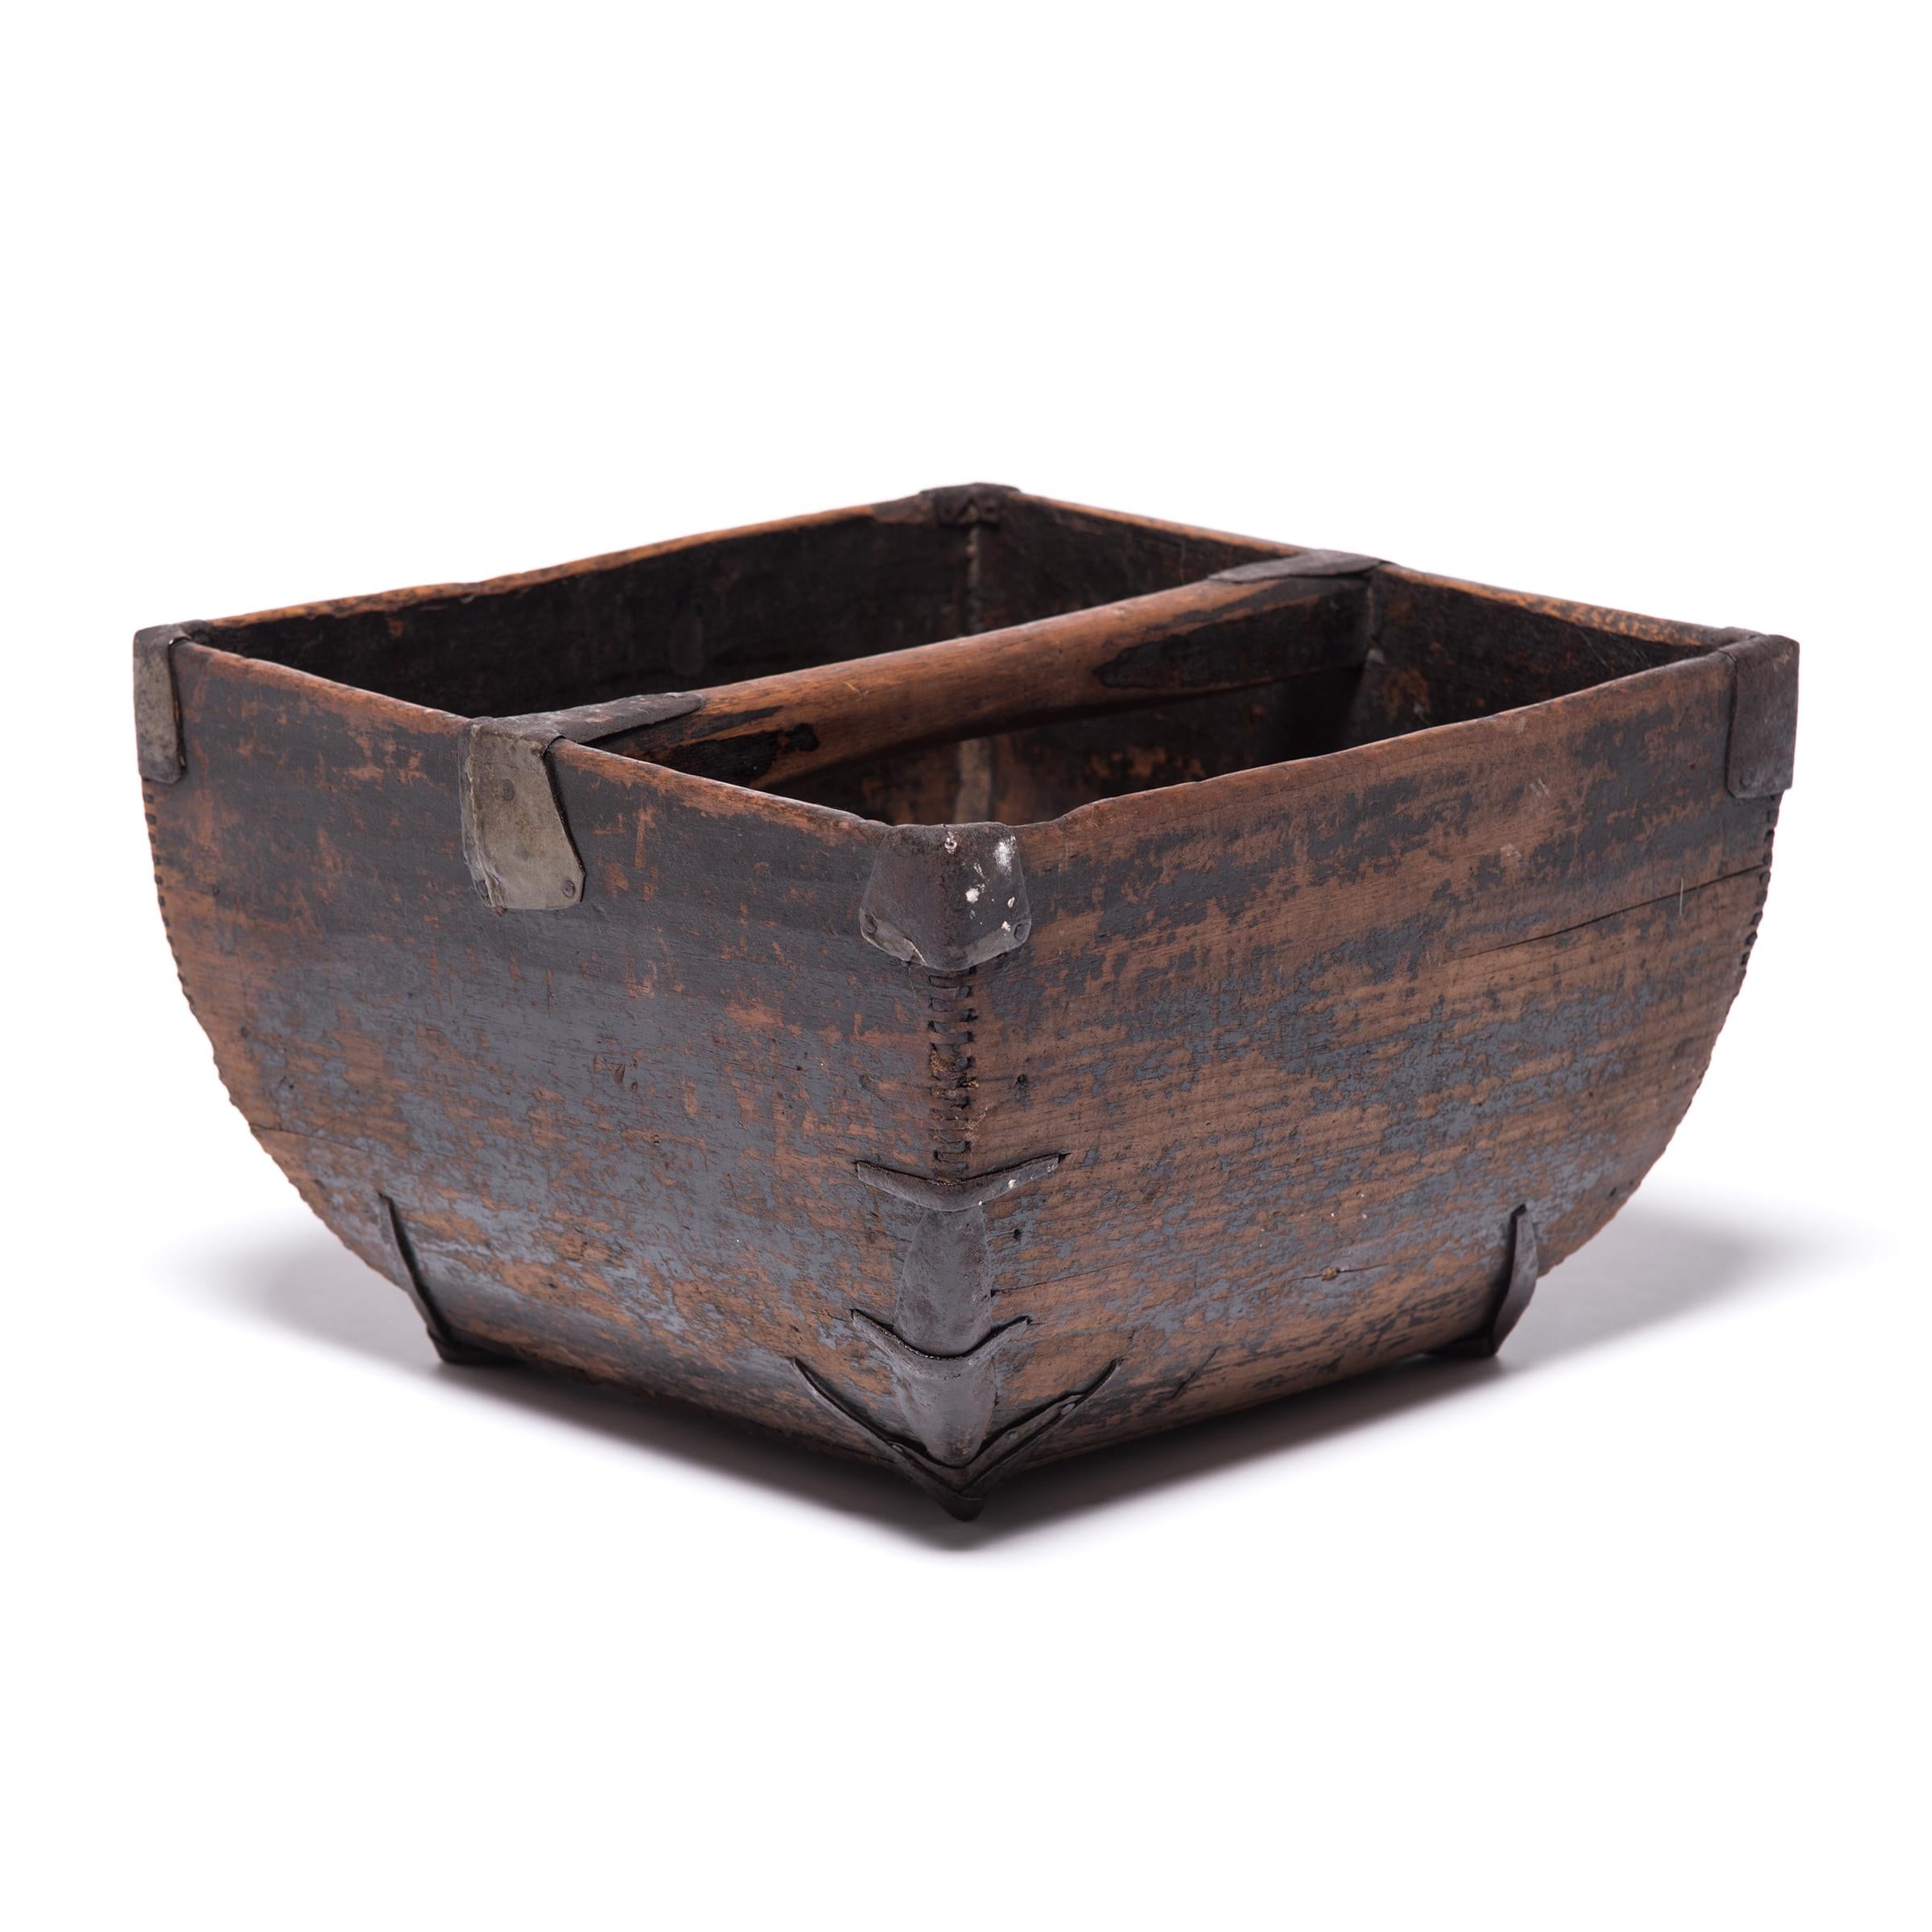 This rustic container was made over a hundred years ago to measure and hold a dou of rice, an ancient Chinese measurement. It is handcrafted with thin finger joints, iron-finished edges, and a subtly arched handle. Antique iron repairs reinforce the